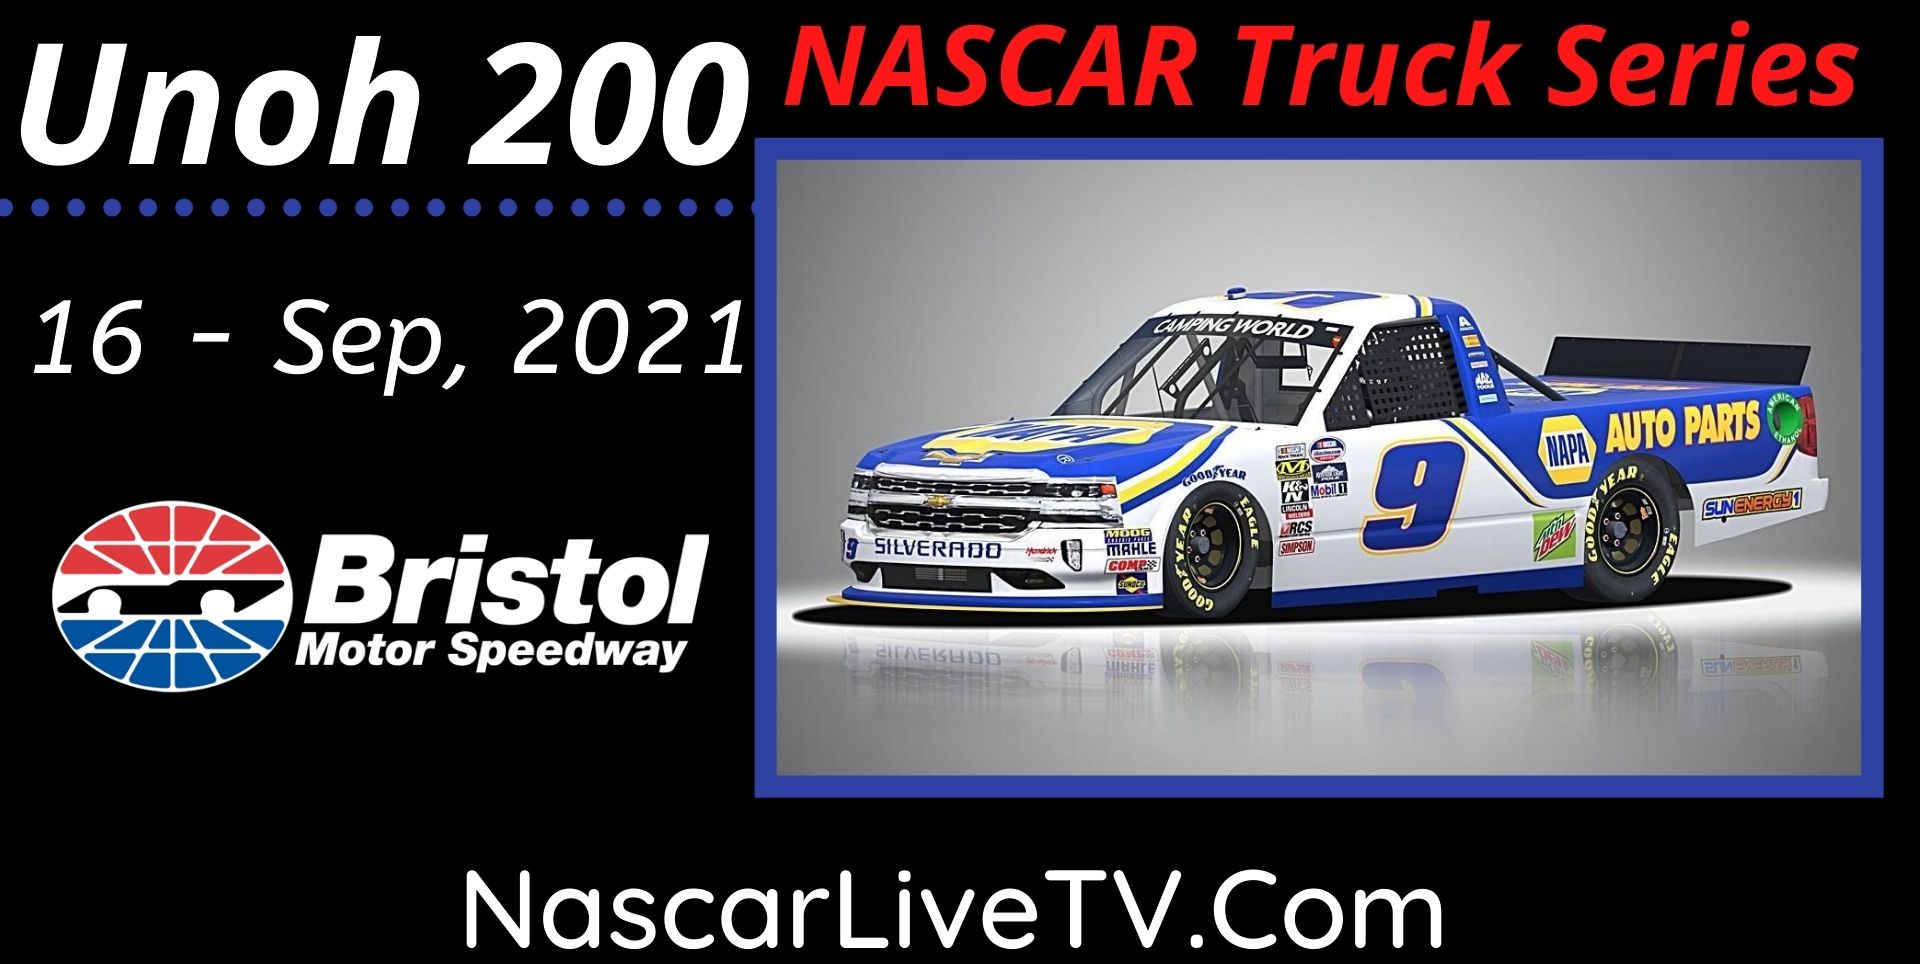 nascar-truck-unoh-200-live-streaming